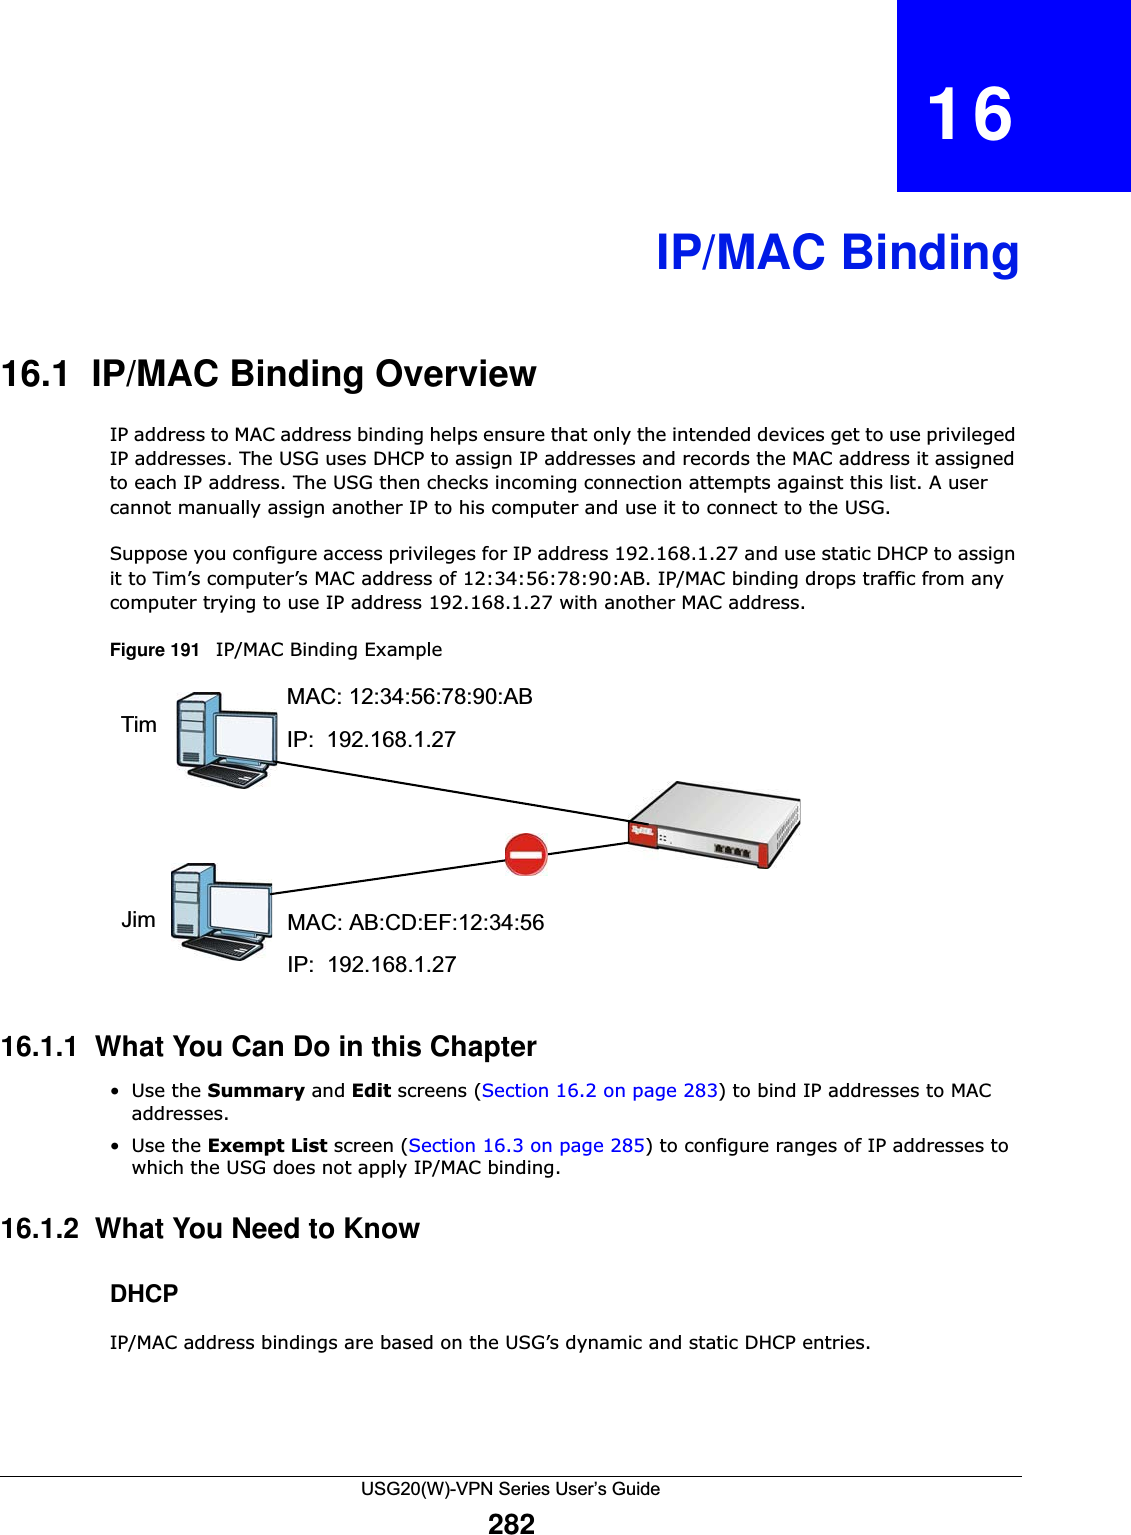 USG20(W)-VPN Series User’s Guide282CHAPTER   16IP/MAC Binding16.1  IP/MAC Binding OverviewIP address to MAC address binding helps ensure that only the intended devices get to use privileged IP addresses. The USG uses DHCP to assign IP addresses and records the MAC address it assigned to each IP address. The USG then checks incoming connection attempts against this list. A user cannot manually assign another IP to his computer and use it to connect to the USG. Suppose you configure access privileges for IP address 192.168.1.27 and use static DHCP to assign it to Tim’s computer’s MAC address of 12:34:56:78:90:AB. IP/MAC binding drops traffic from any computer trying to use IP address 192.168.1.27 with another MAC address.Figure 191   IP/MAC Binding Example 16.1.1  What You Can Do in this Chapter•Use the Summary and Edit screens (Section 16.2 on page 283) to bind IP addresses to MAC addresses.•Use the Exempt List screen (Section 16.3 on page 285) to configure ranges of IP addresses to which the USG does not apply IP/MAC binding.16.1.2  What You Need to KnowDHCPIP/MAC address bindings are based on the USG’s dynamic and static DHCP entries.MAC: 12:34:56:78:90:ABTim IP:  192.168.1.27MAC: AB:CD:EF:12:34:56JimIP:  192.168.1.27